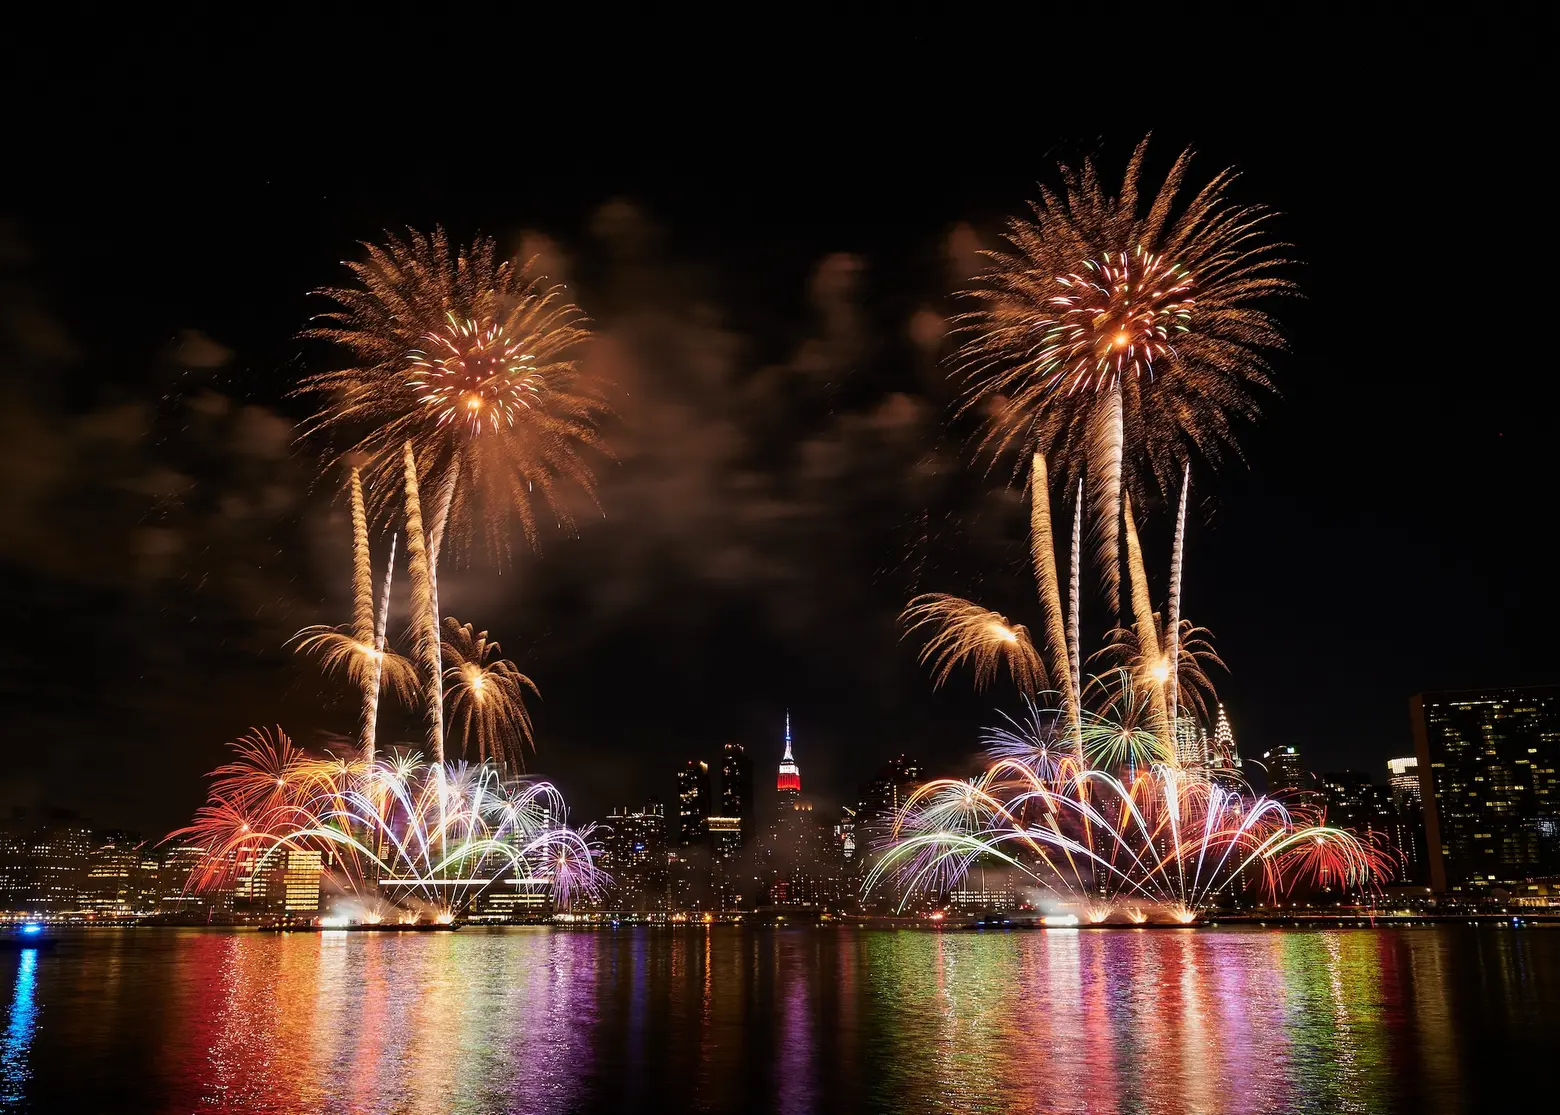 Macy’s July 4th fireworks: NYC to give out free tickets for front-row views of the show